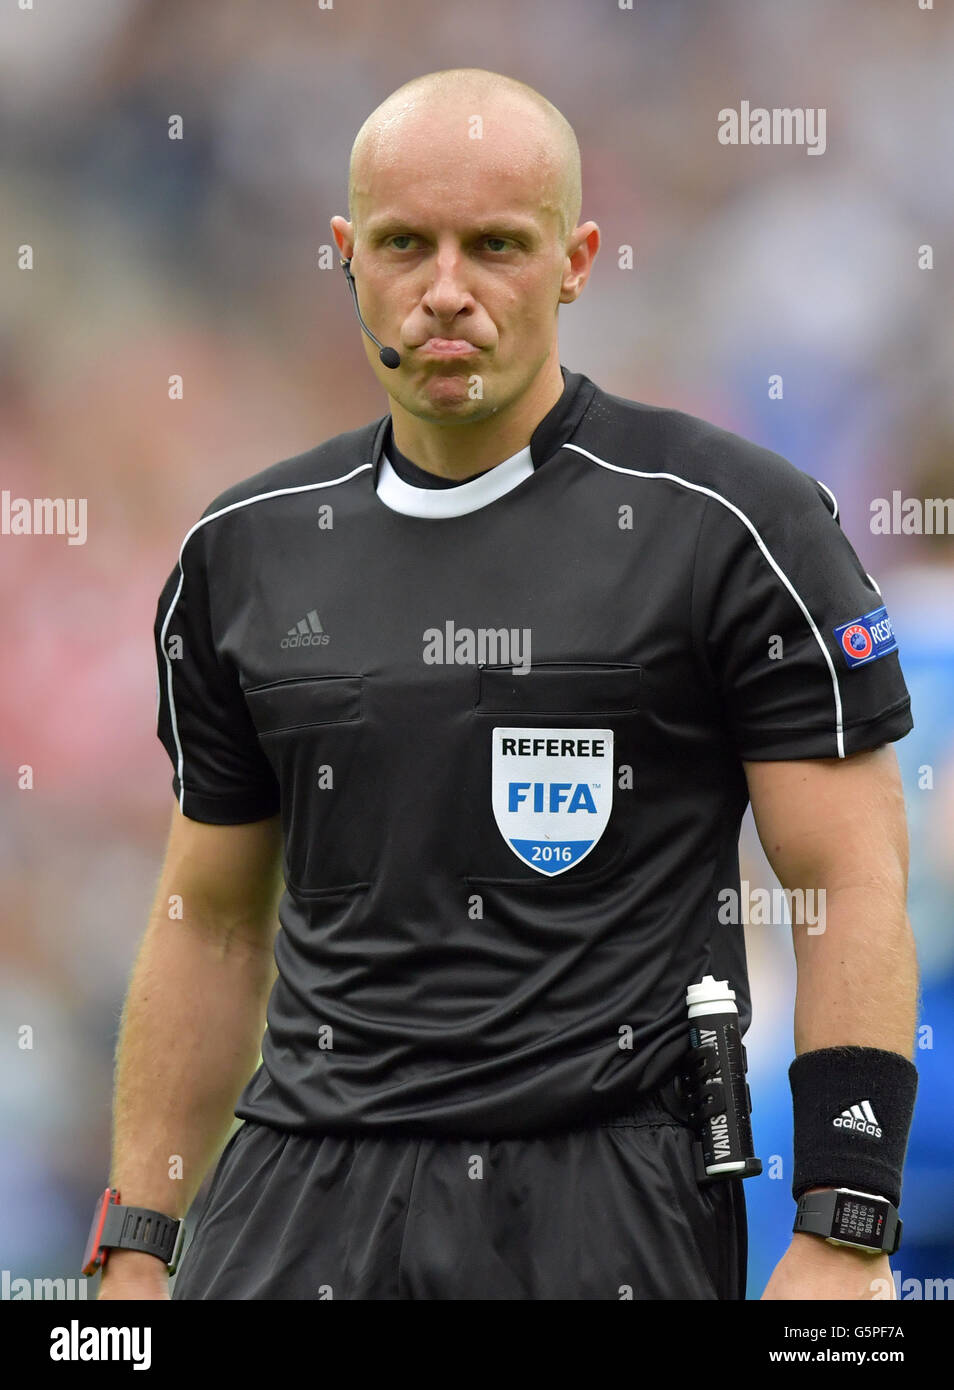 St. Denis, France. 22nd June, 2016. Referee Szymon Marciniak of Poland  looks on during the Group F preliminary round soccer match of the UEFA EURO  2016 between Iceland and Austria at the